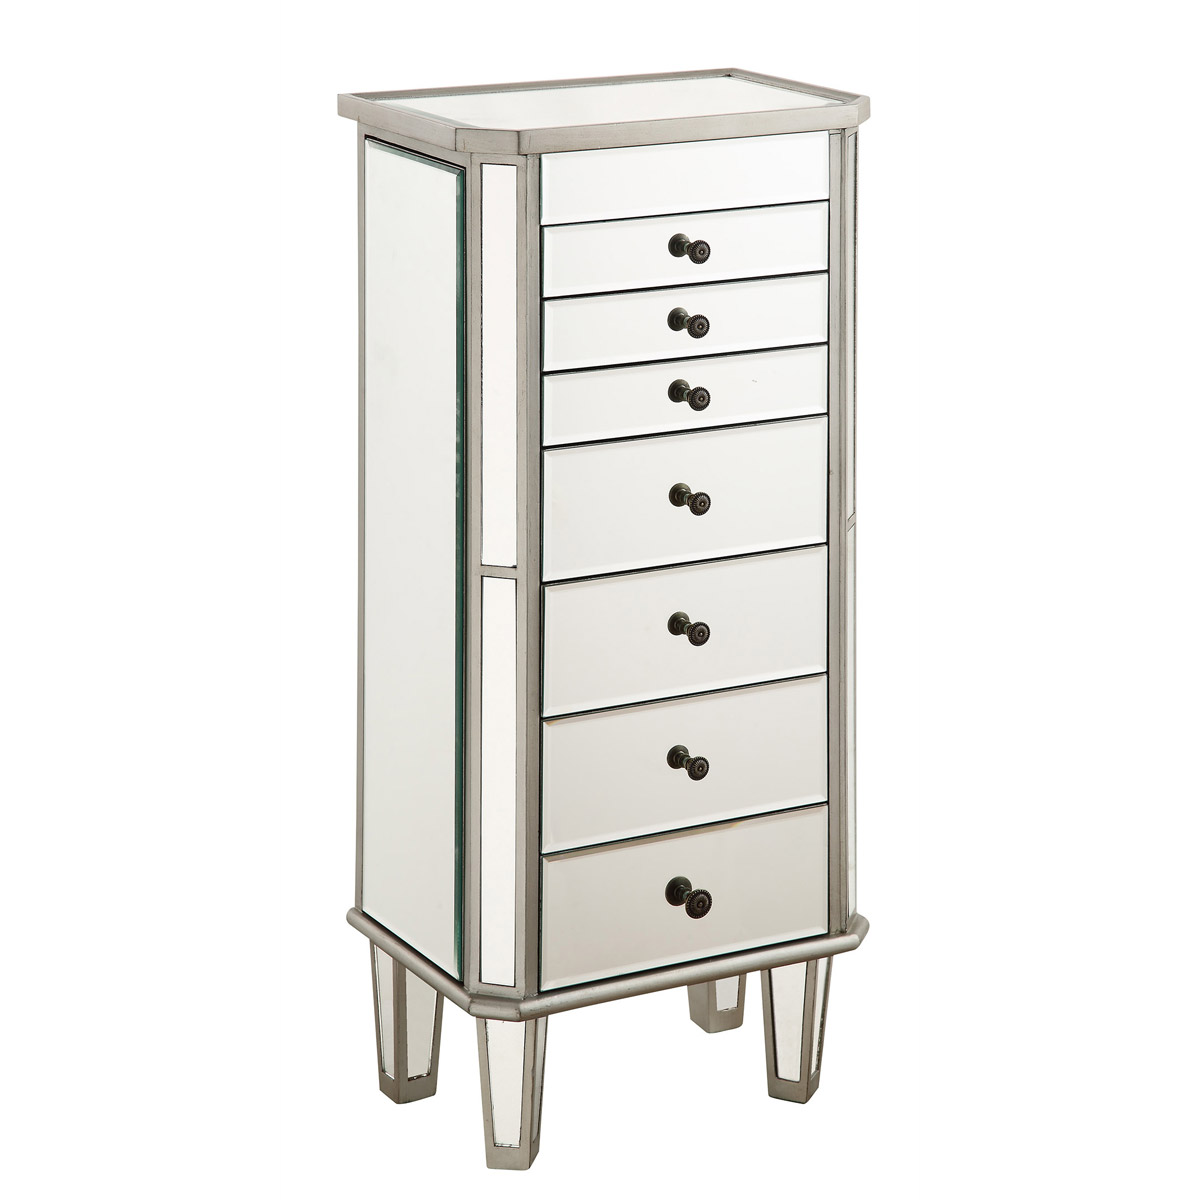 Mf6-1003sc 7 Drawer Jewelry Armoire Silver Clear, Hand Rubbed Antique Silver - 18 X 12 X 41 In.